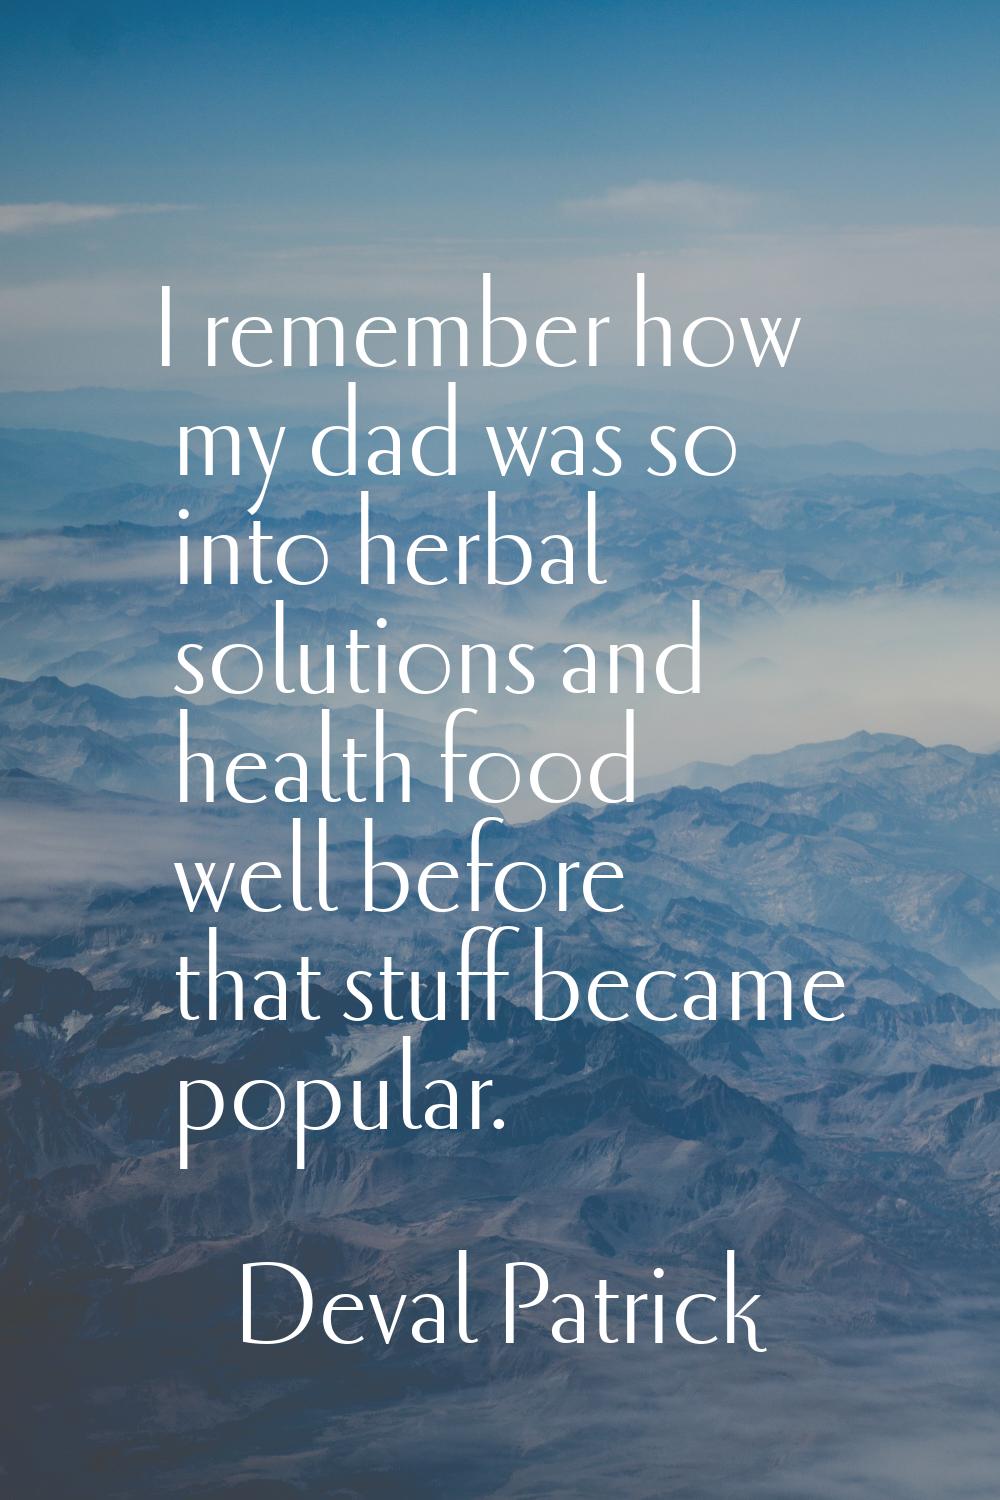 I remember how my dad was so into herbal solutions and health food well before that stuff became po